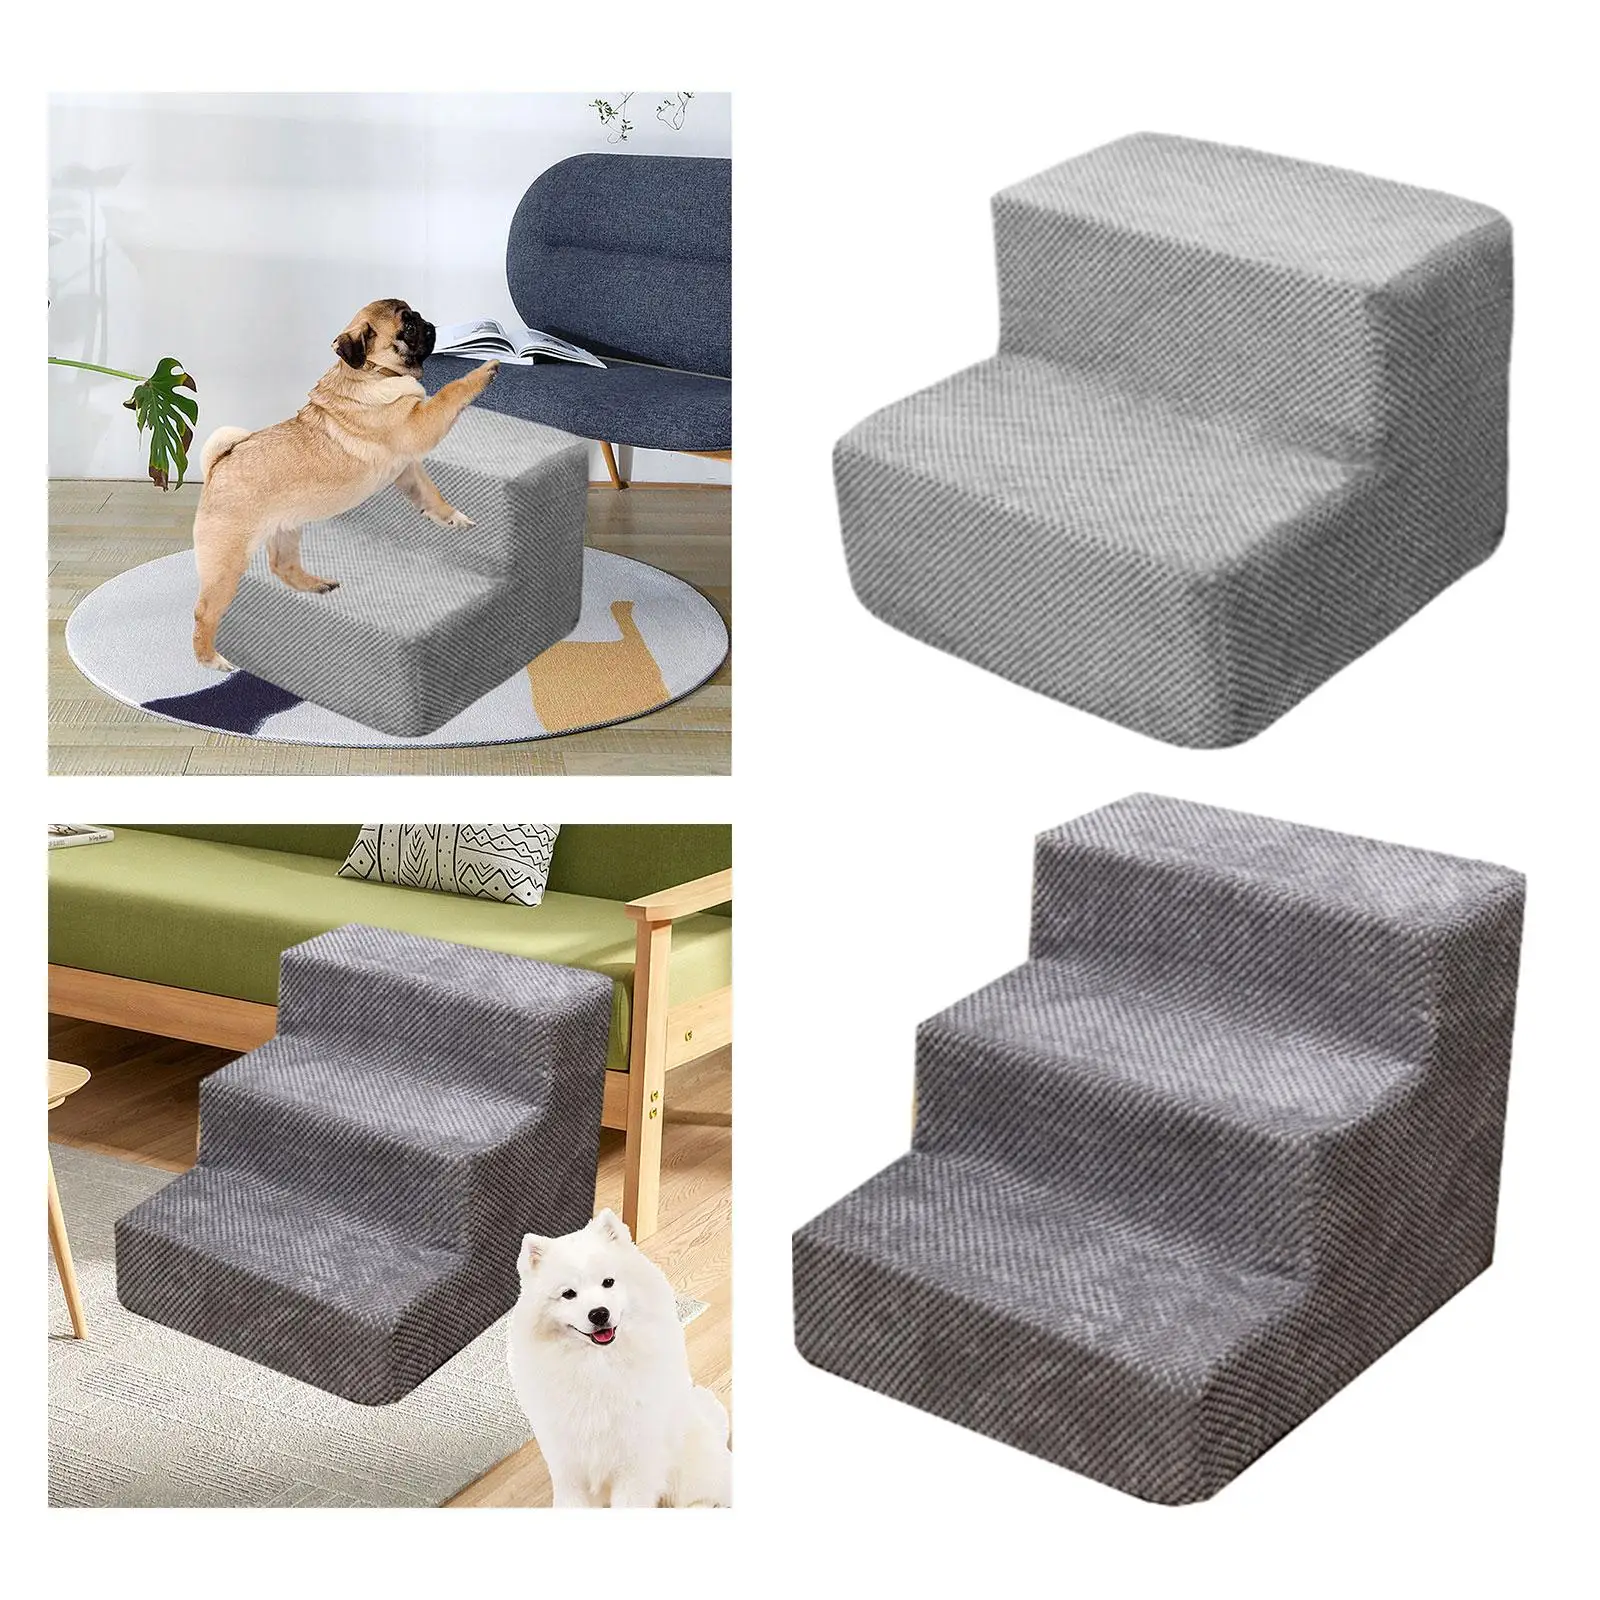 Dog Stairs Small Dogs and Cats Soft Anti Slip Bottom Pet Ramp Dog Steps Ramp for Couch Car Sofa Indoor Bed